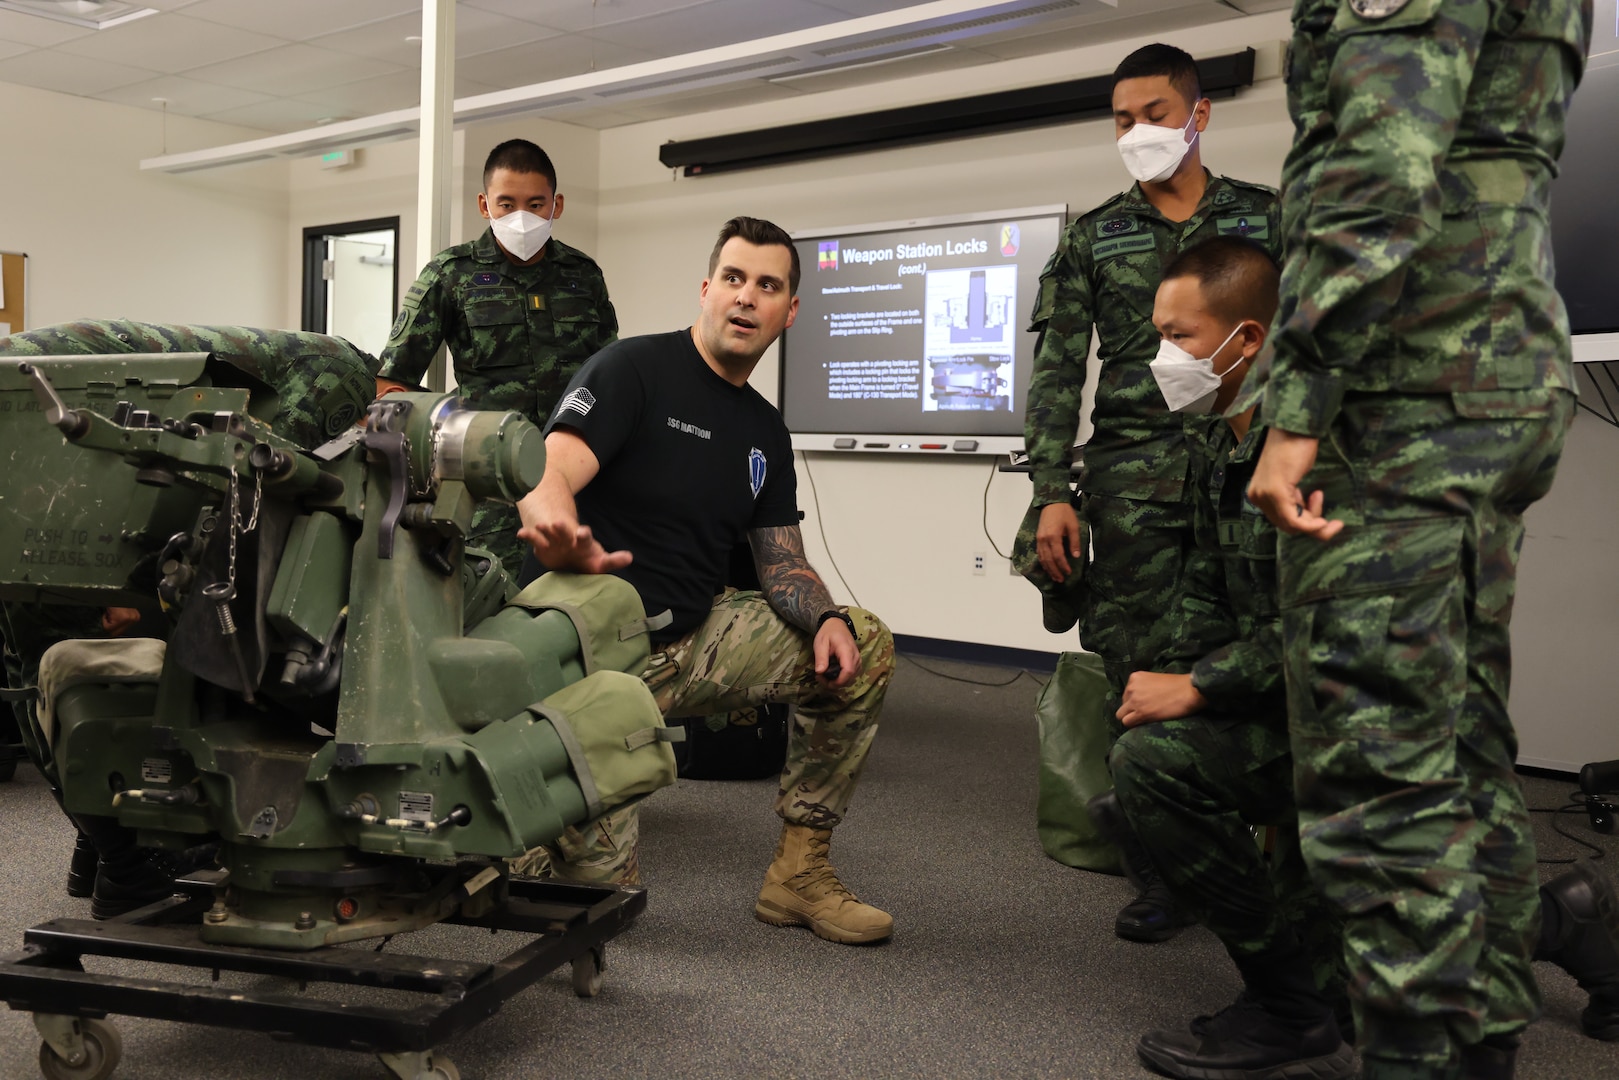 Staff Sgt. Travis Mattoon, Stryker Leaders Course instructor from 1st Battalion, 205th Regional Training Institute, Washington Army National Guard, instructs Royal Thai Army officers on the remote weapons system of a Stryker combat vehicle.